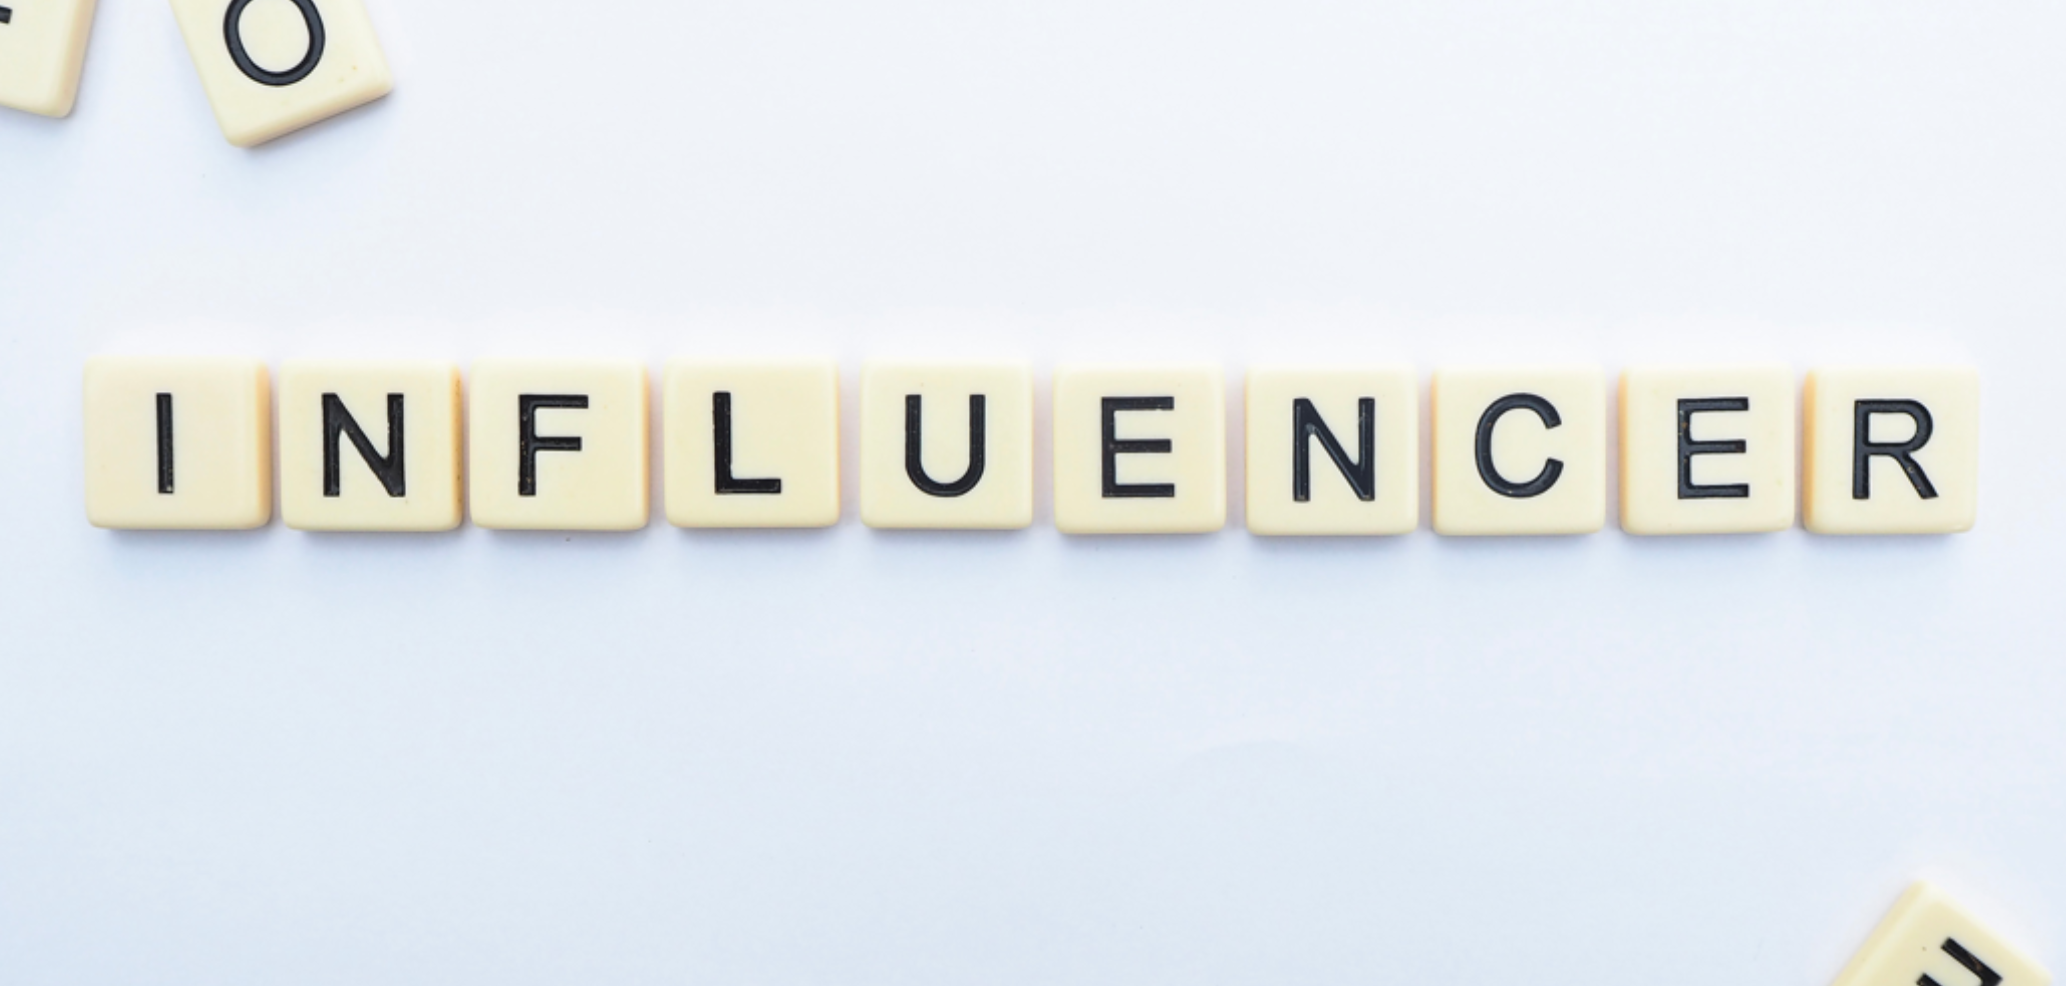 What is the new normal for Influencer Marketing?